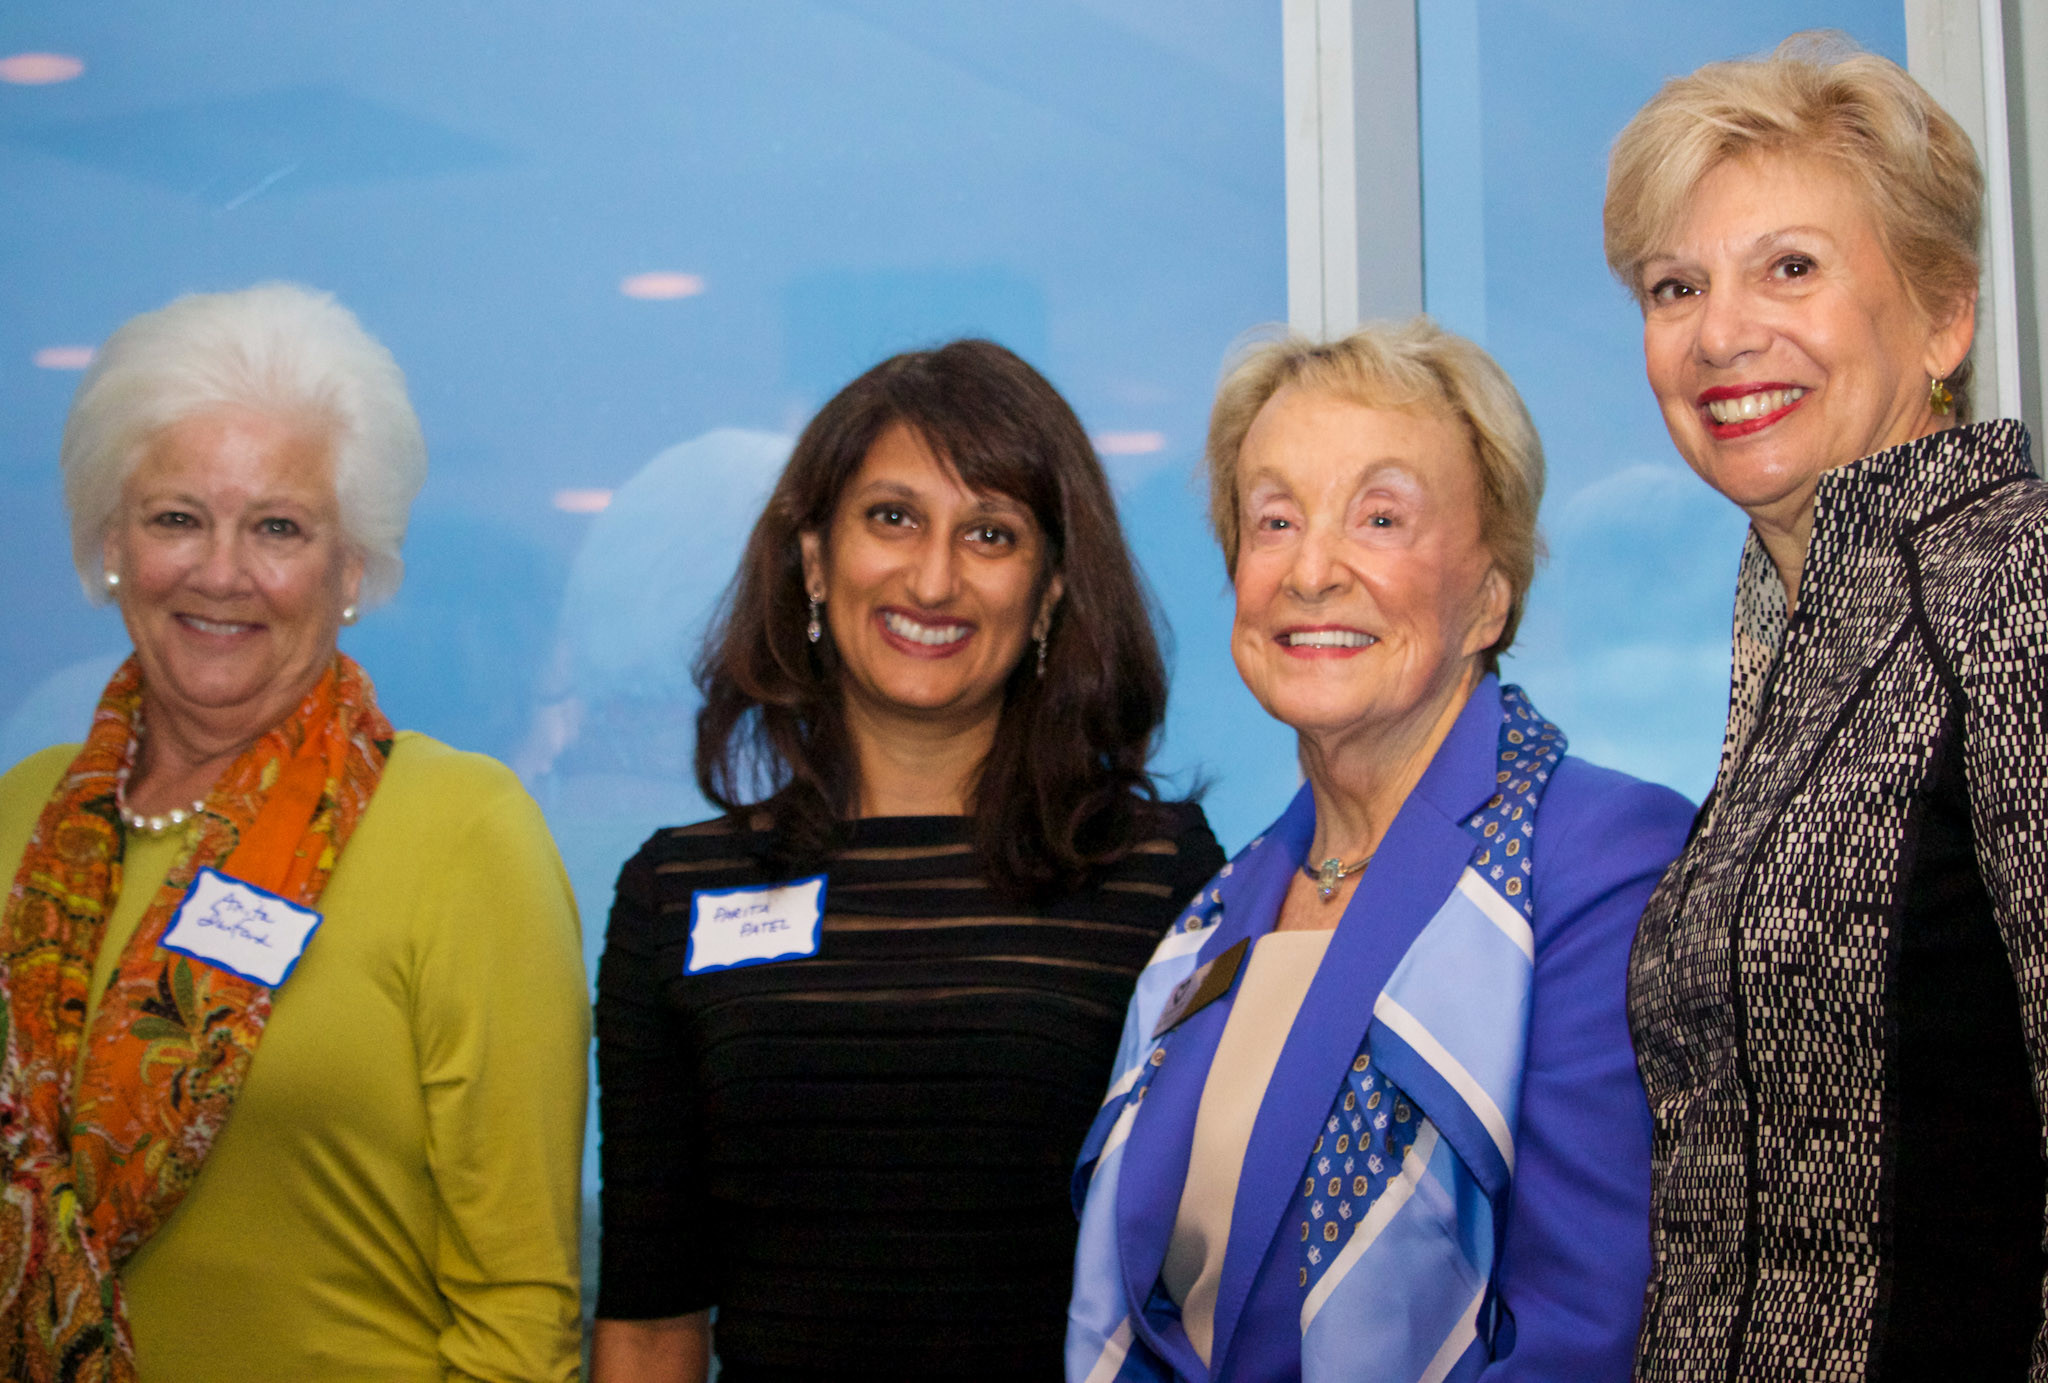 Volunteers recognized for completing 500 Hours of volunteer service were Anita Dunsford and Dr. Parita Patel, who were joined by Volunteers in Medicine Co-Founder Dottie Dorion and Board Chair Helen Morse.